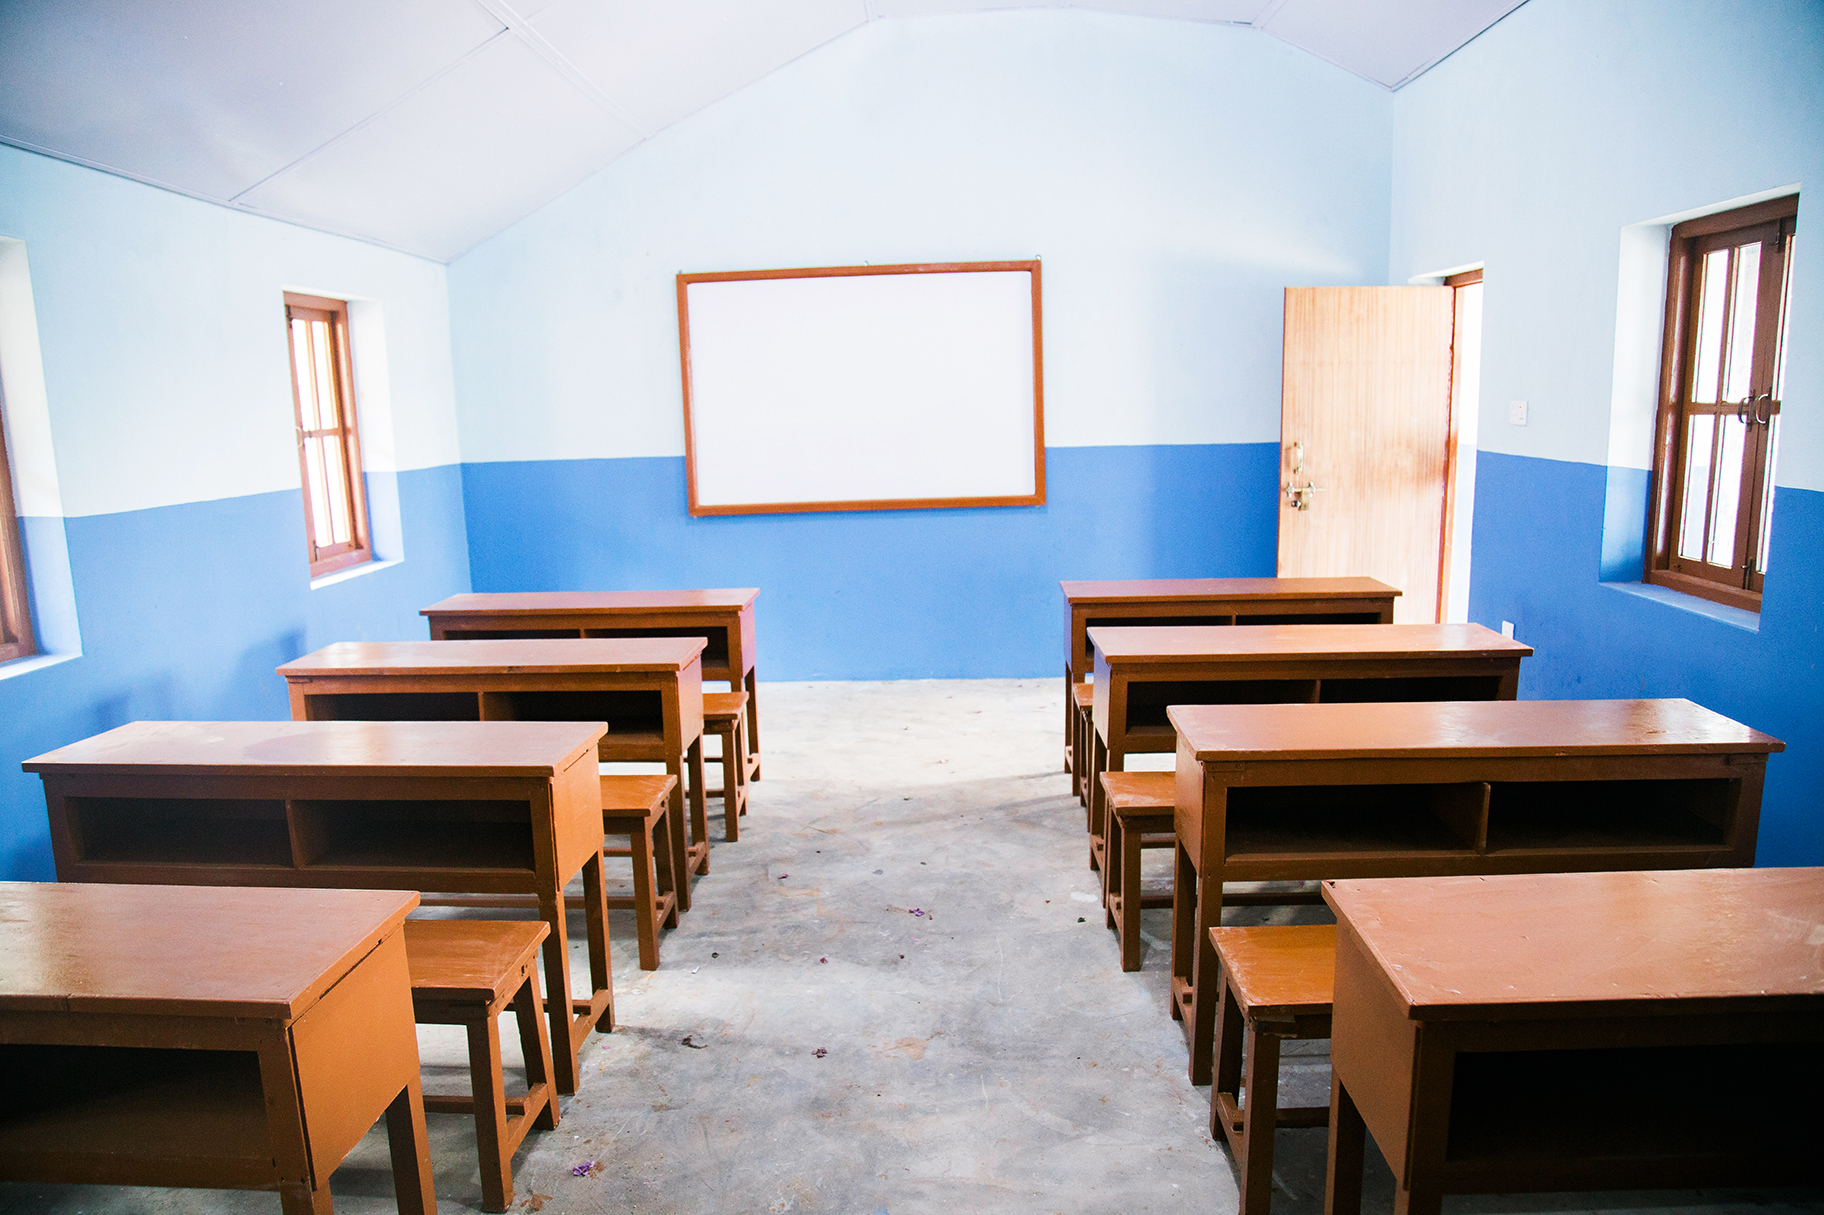 These new schools are the first schools in all of Nepal to comply with new structural post-earthquake government regulations.